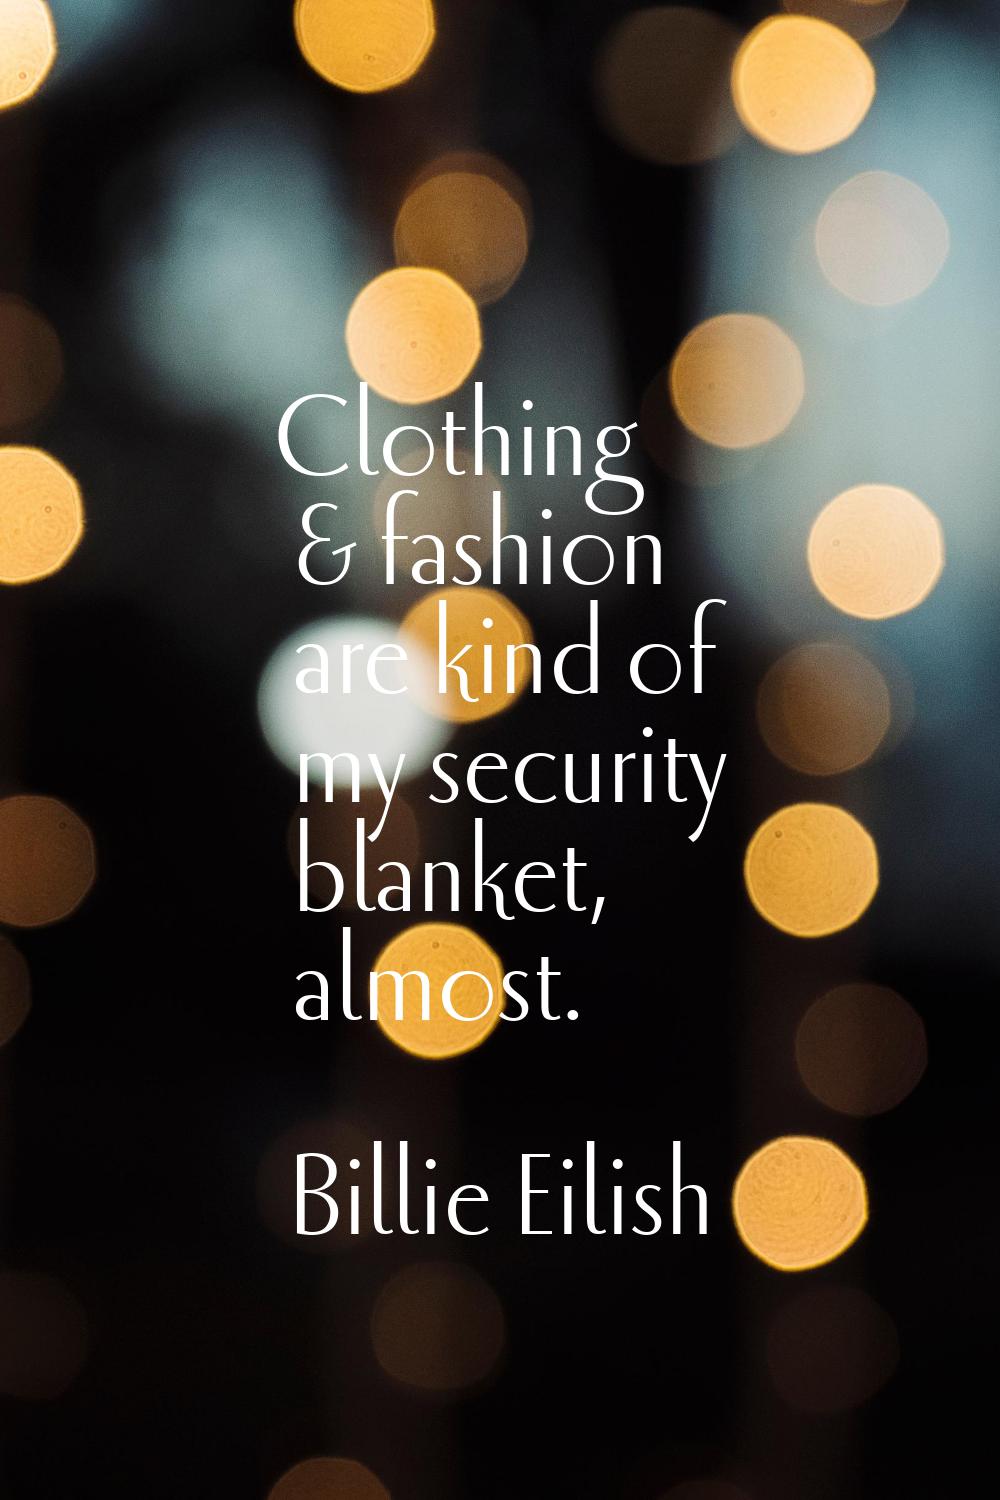 Clothing & fashion are kind of my security blanket, almost.